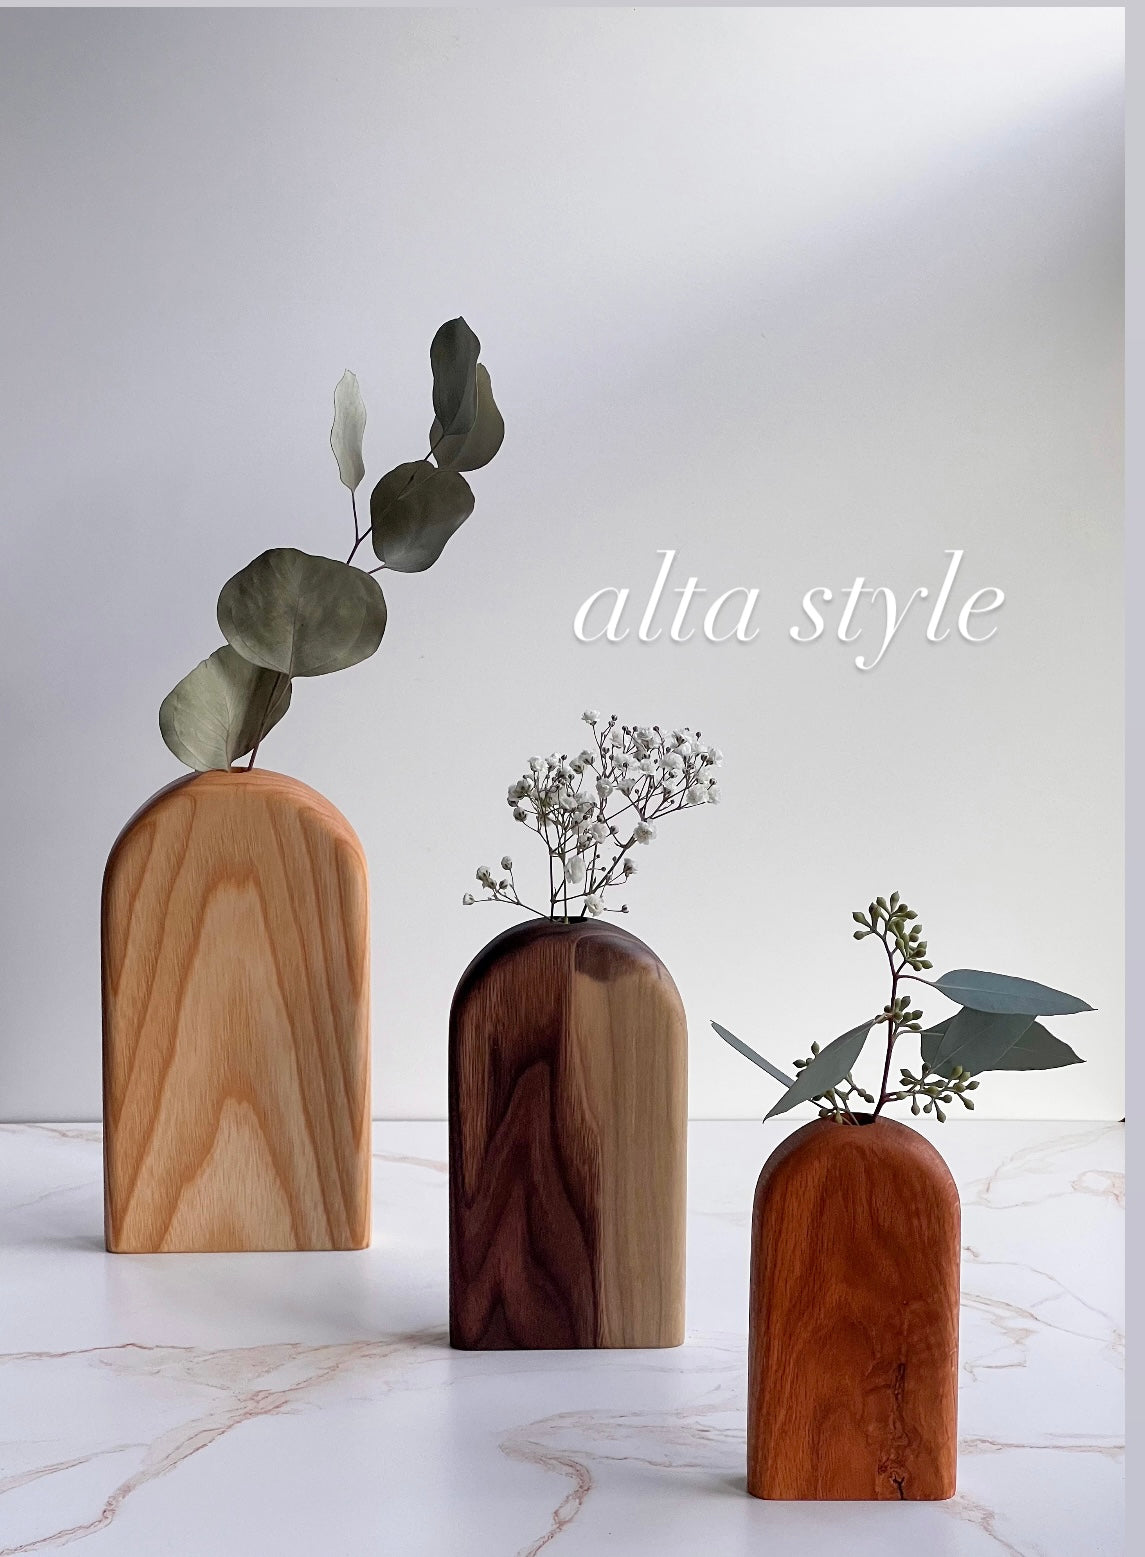 Organic bud/flower vases in all different variations of light and dark wood handmade by Camino Woodshop, making the perfect decor for your home or gift for friends and family